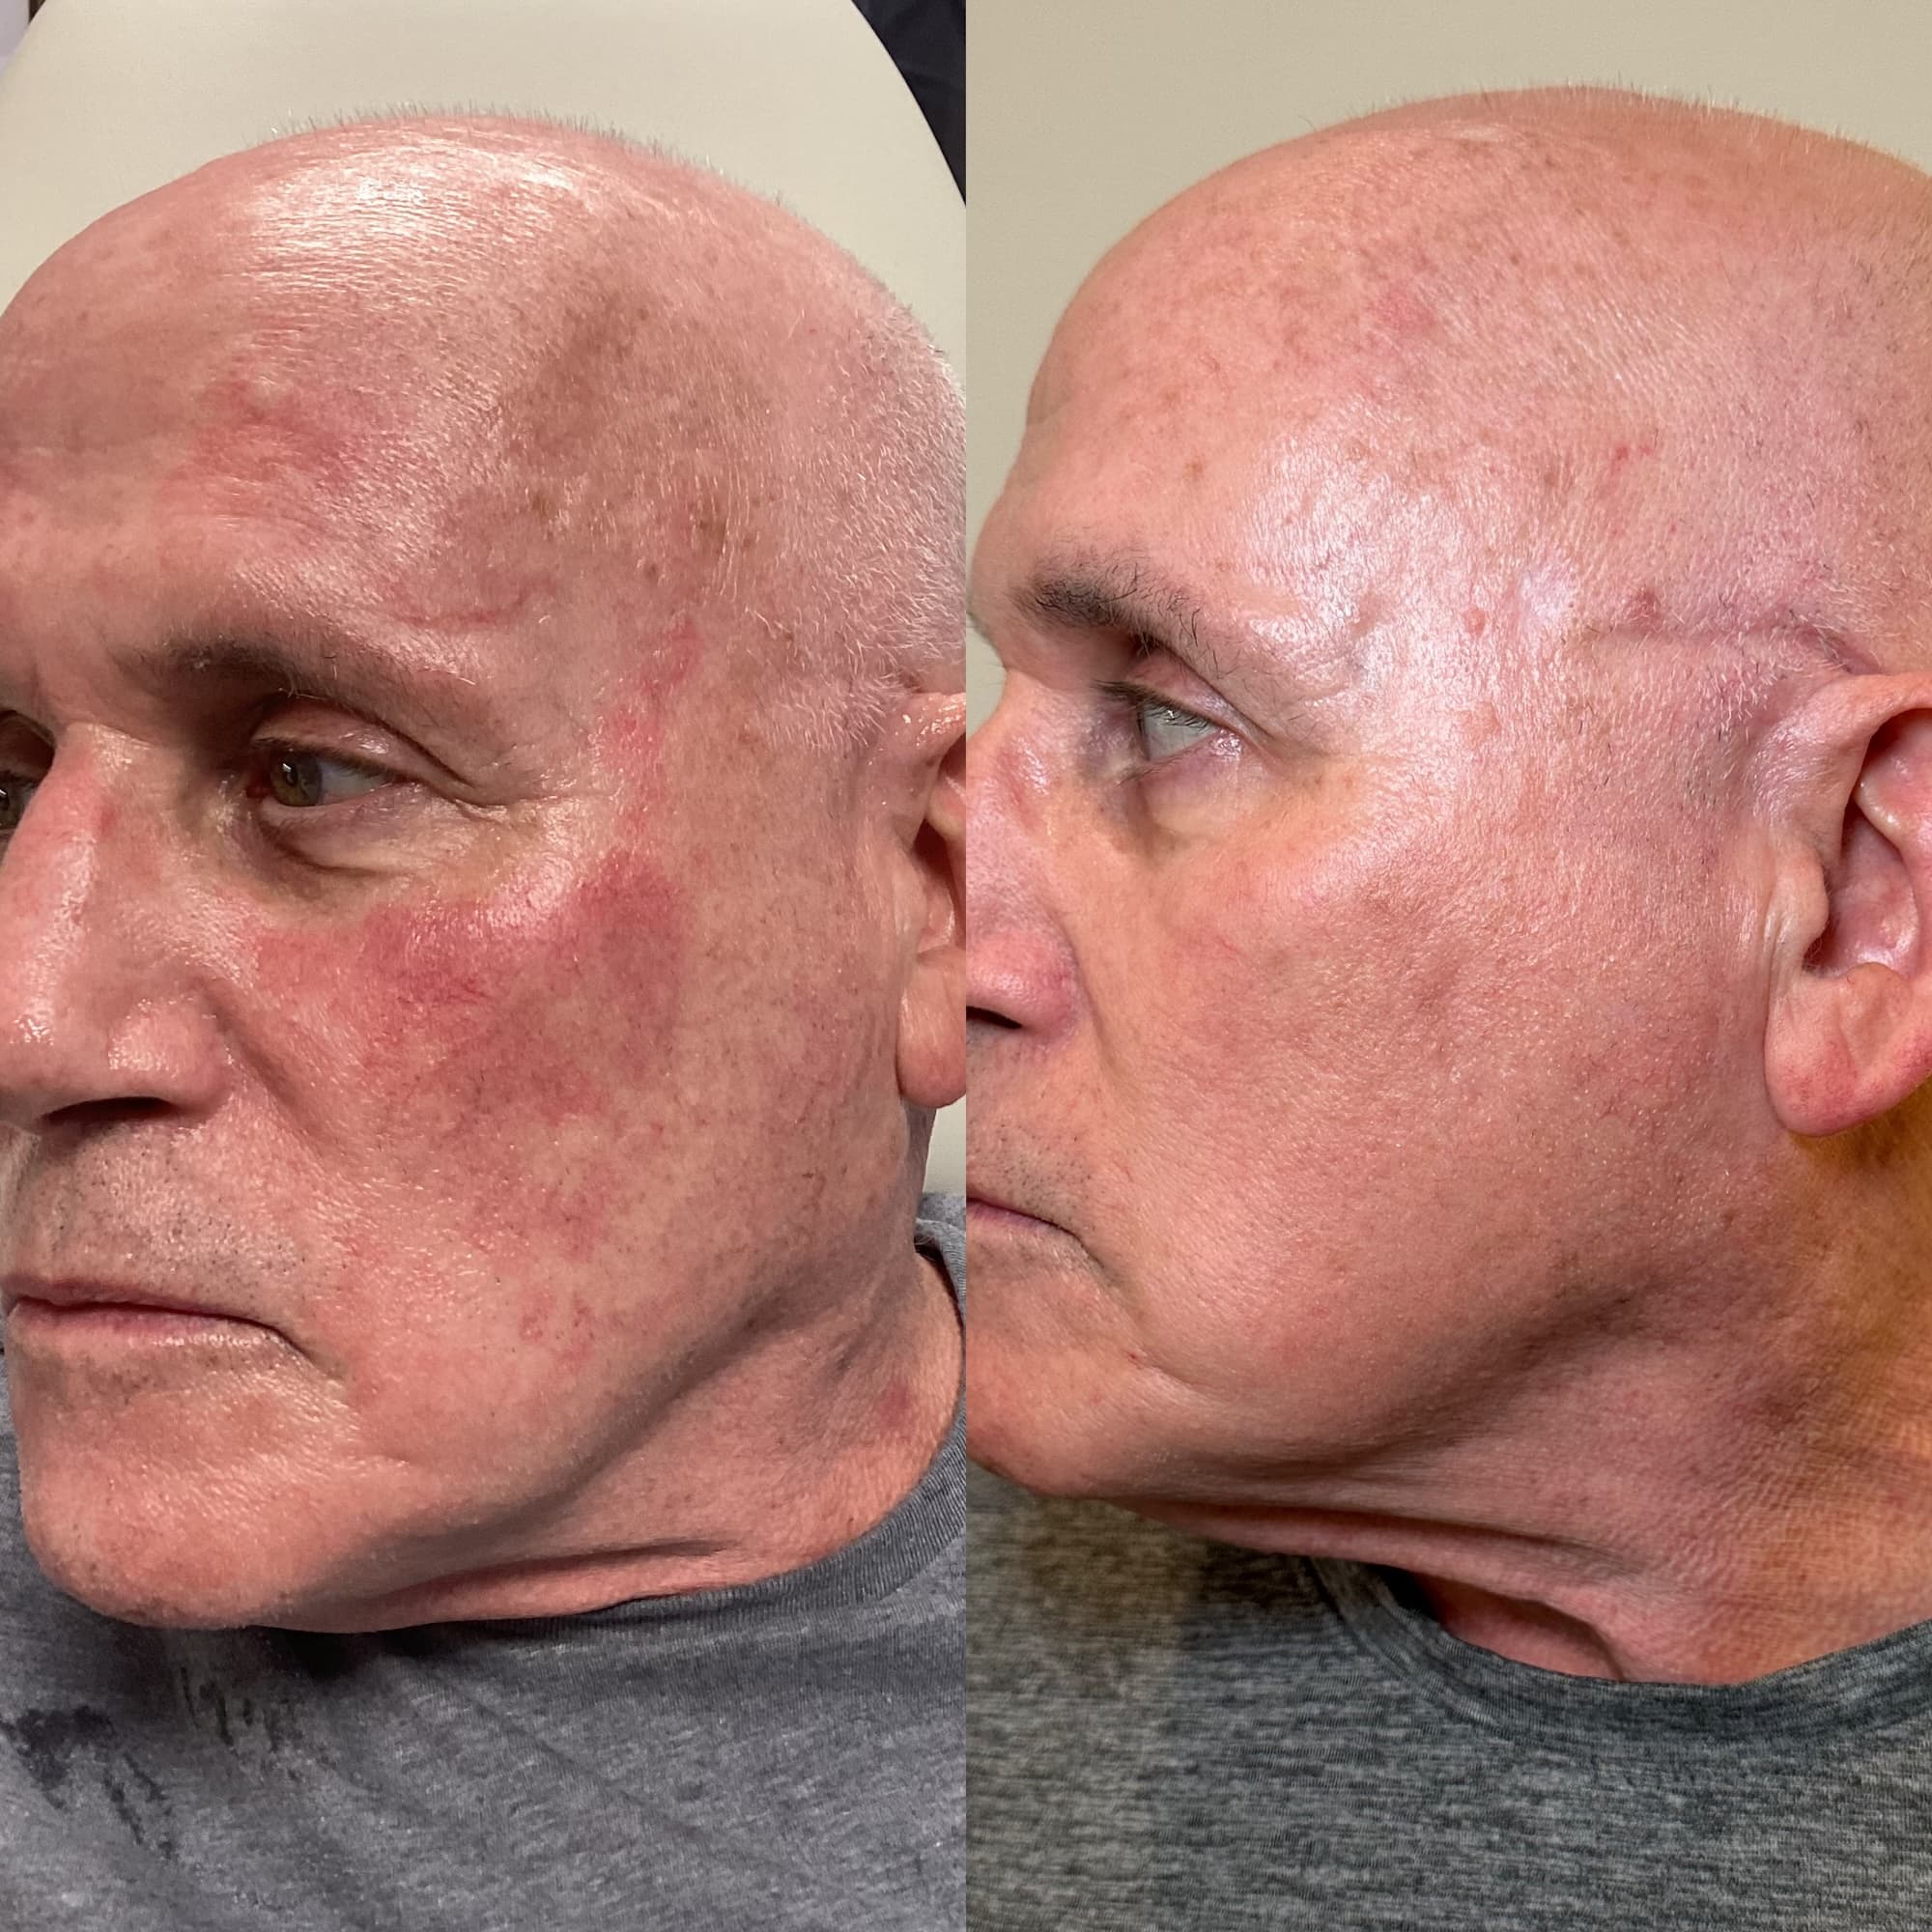 Man's face left side view before and after showing results of BBL and HALO - removal of discolored red patches of skin